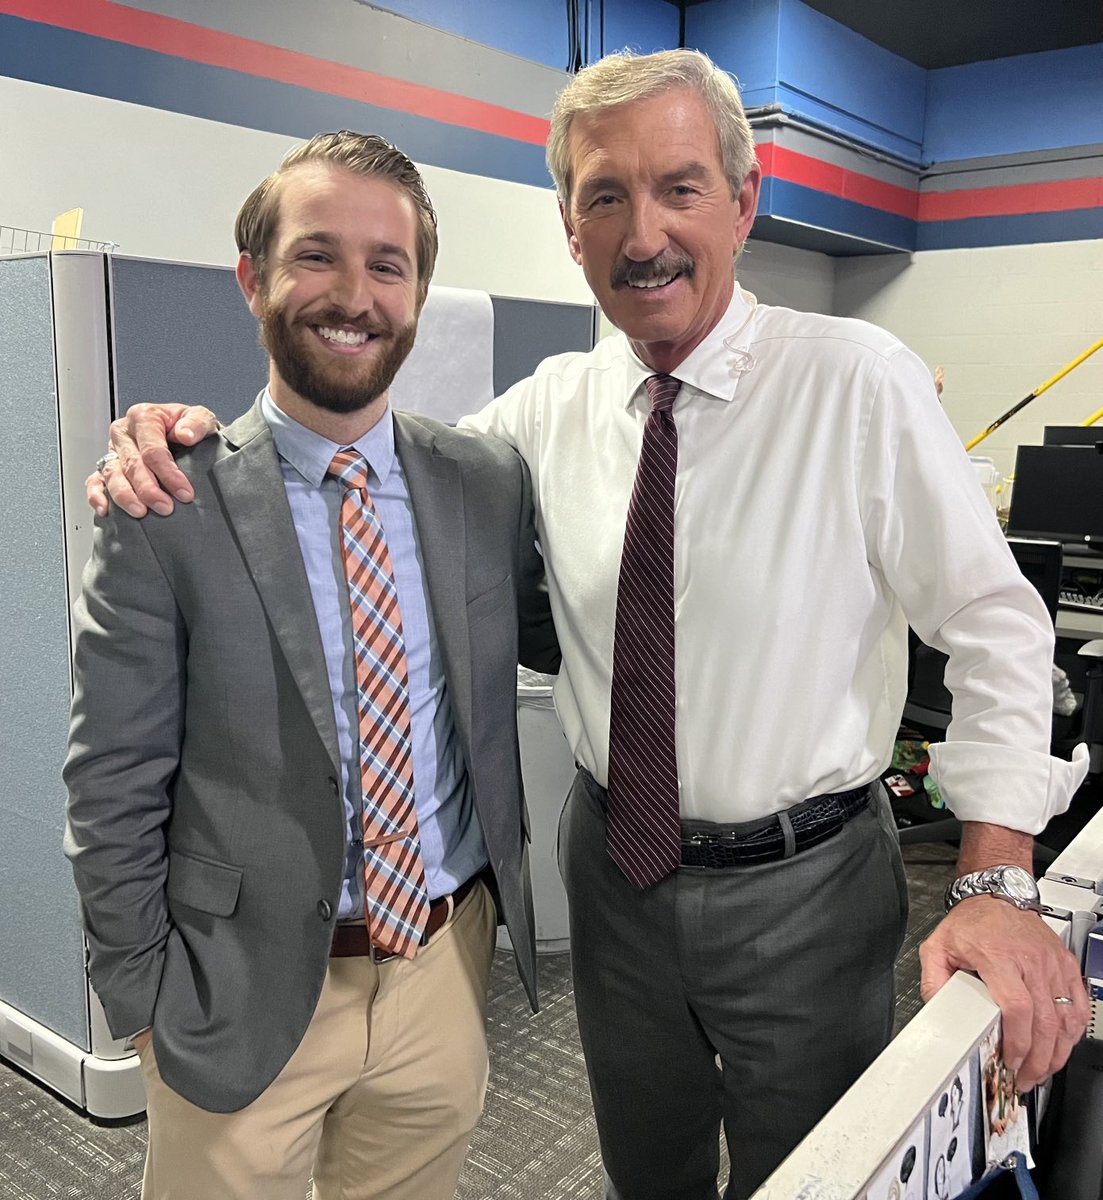 News 2 Capitol Hill Reporter Chris O’Brien leaves us today after terrific work during the last several Legislative Sessions. Chris will be missed as he begins his new job with the State. Best of luck on the new chapter.